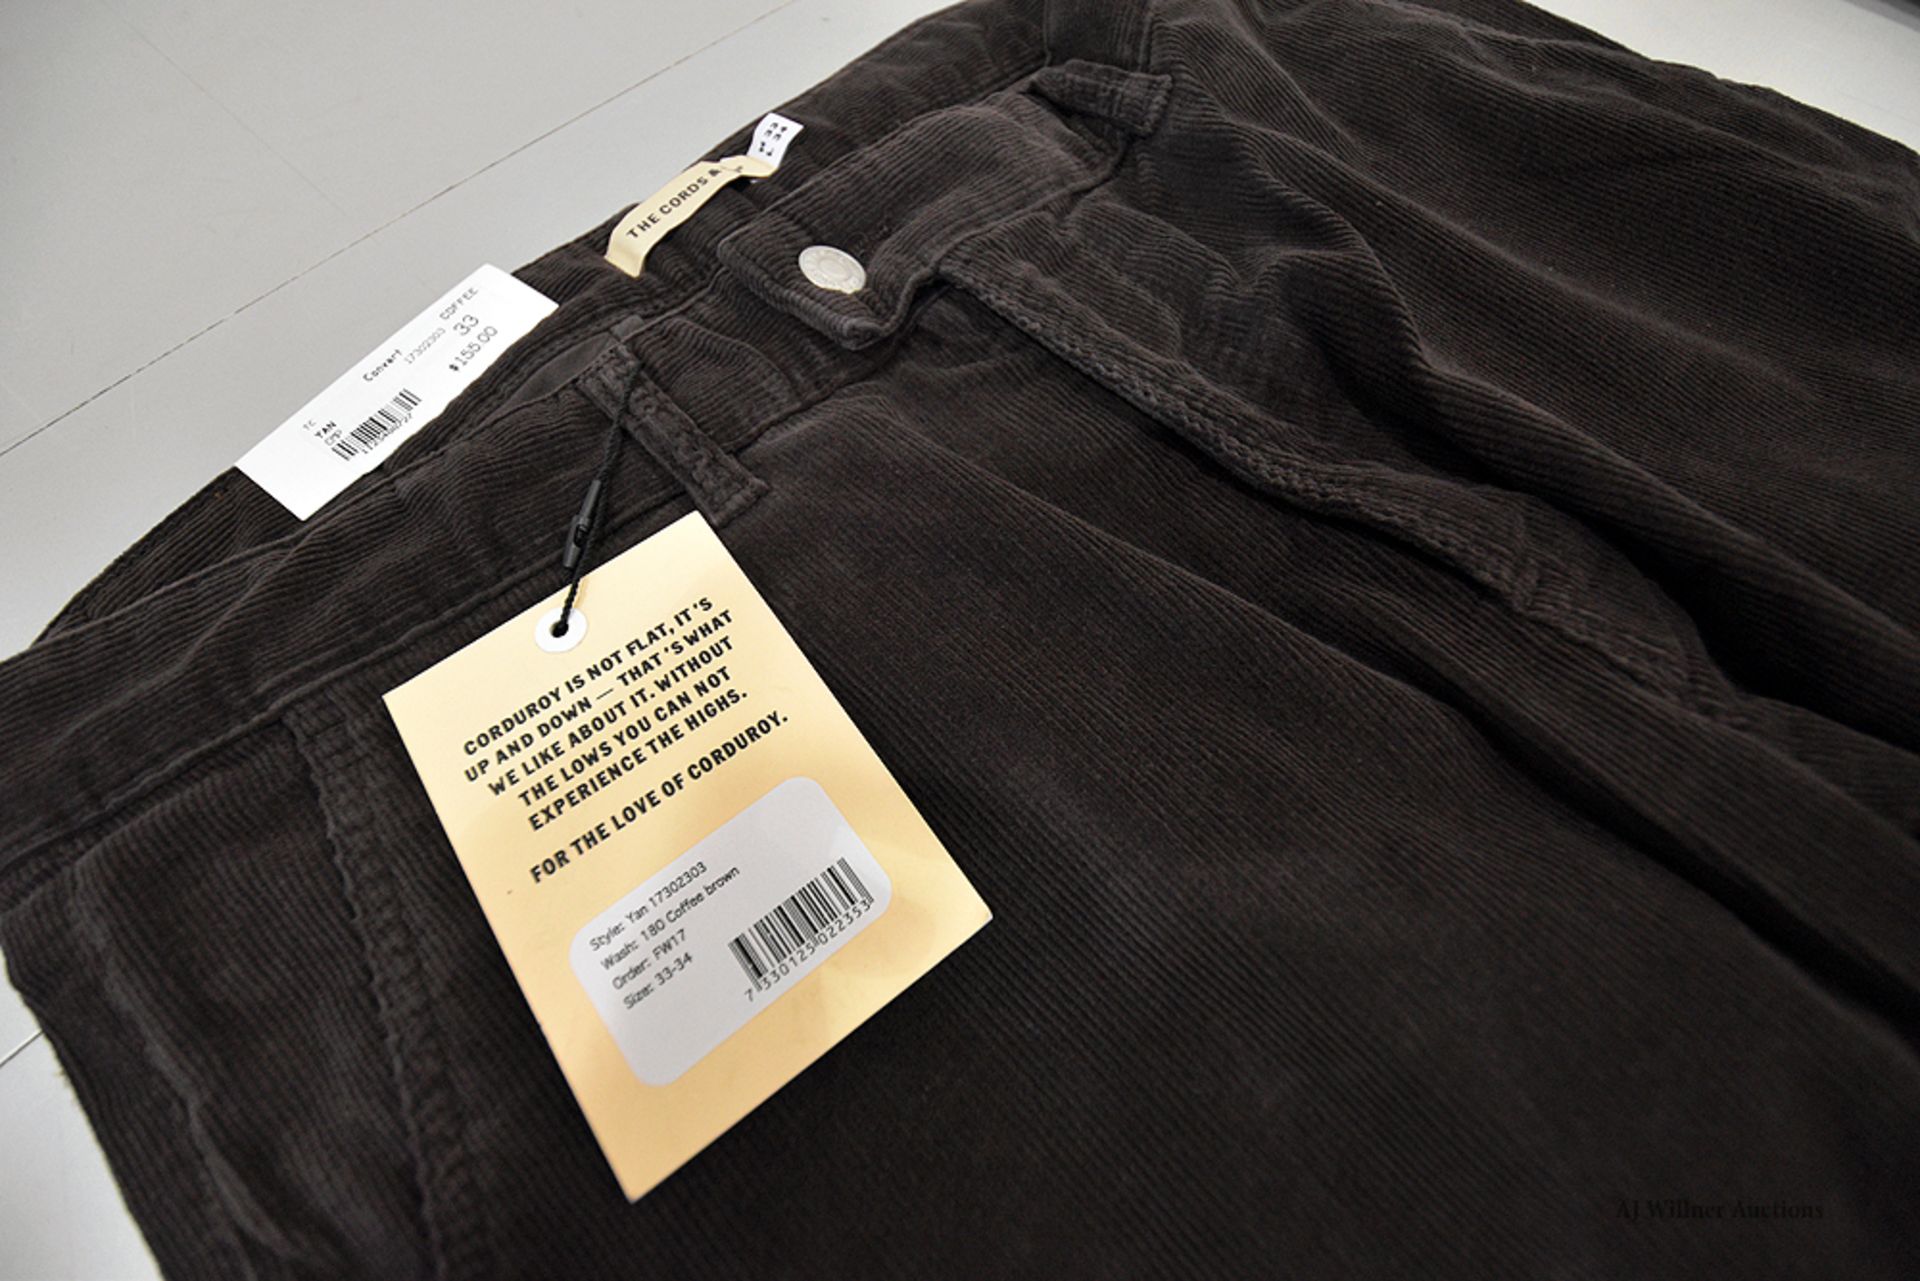 The Cords & Co. "Yan" Mens/Mid-Waist/Straight Fit/Narrow Leg Pants MSRP $150 - Image 6 of 6